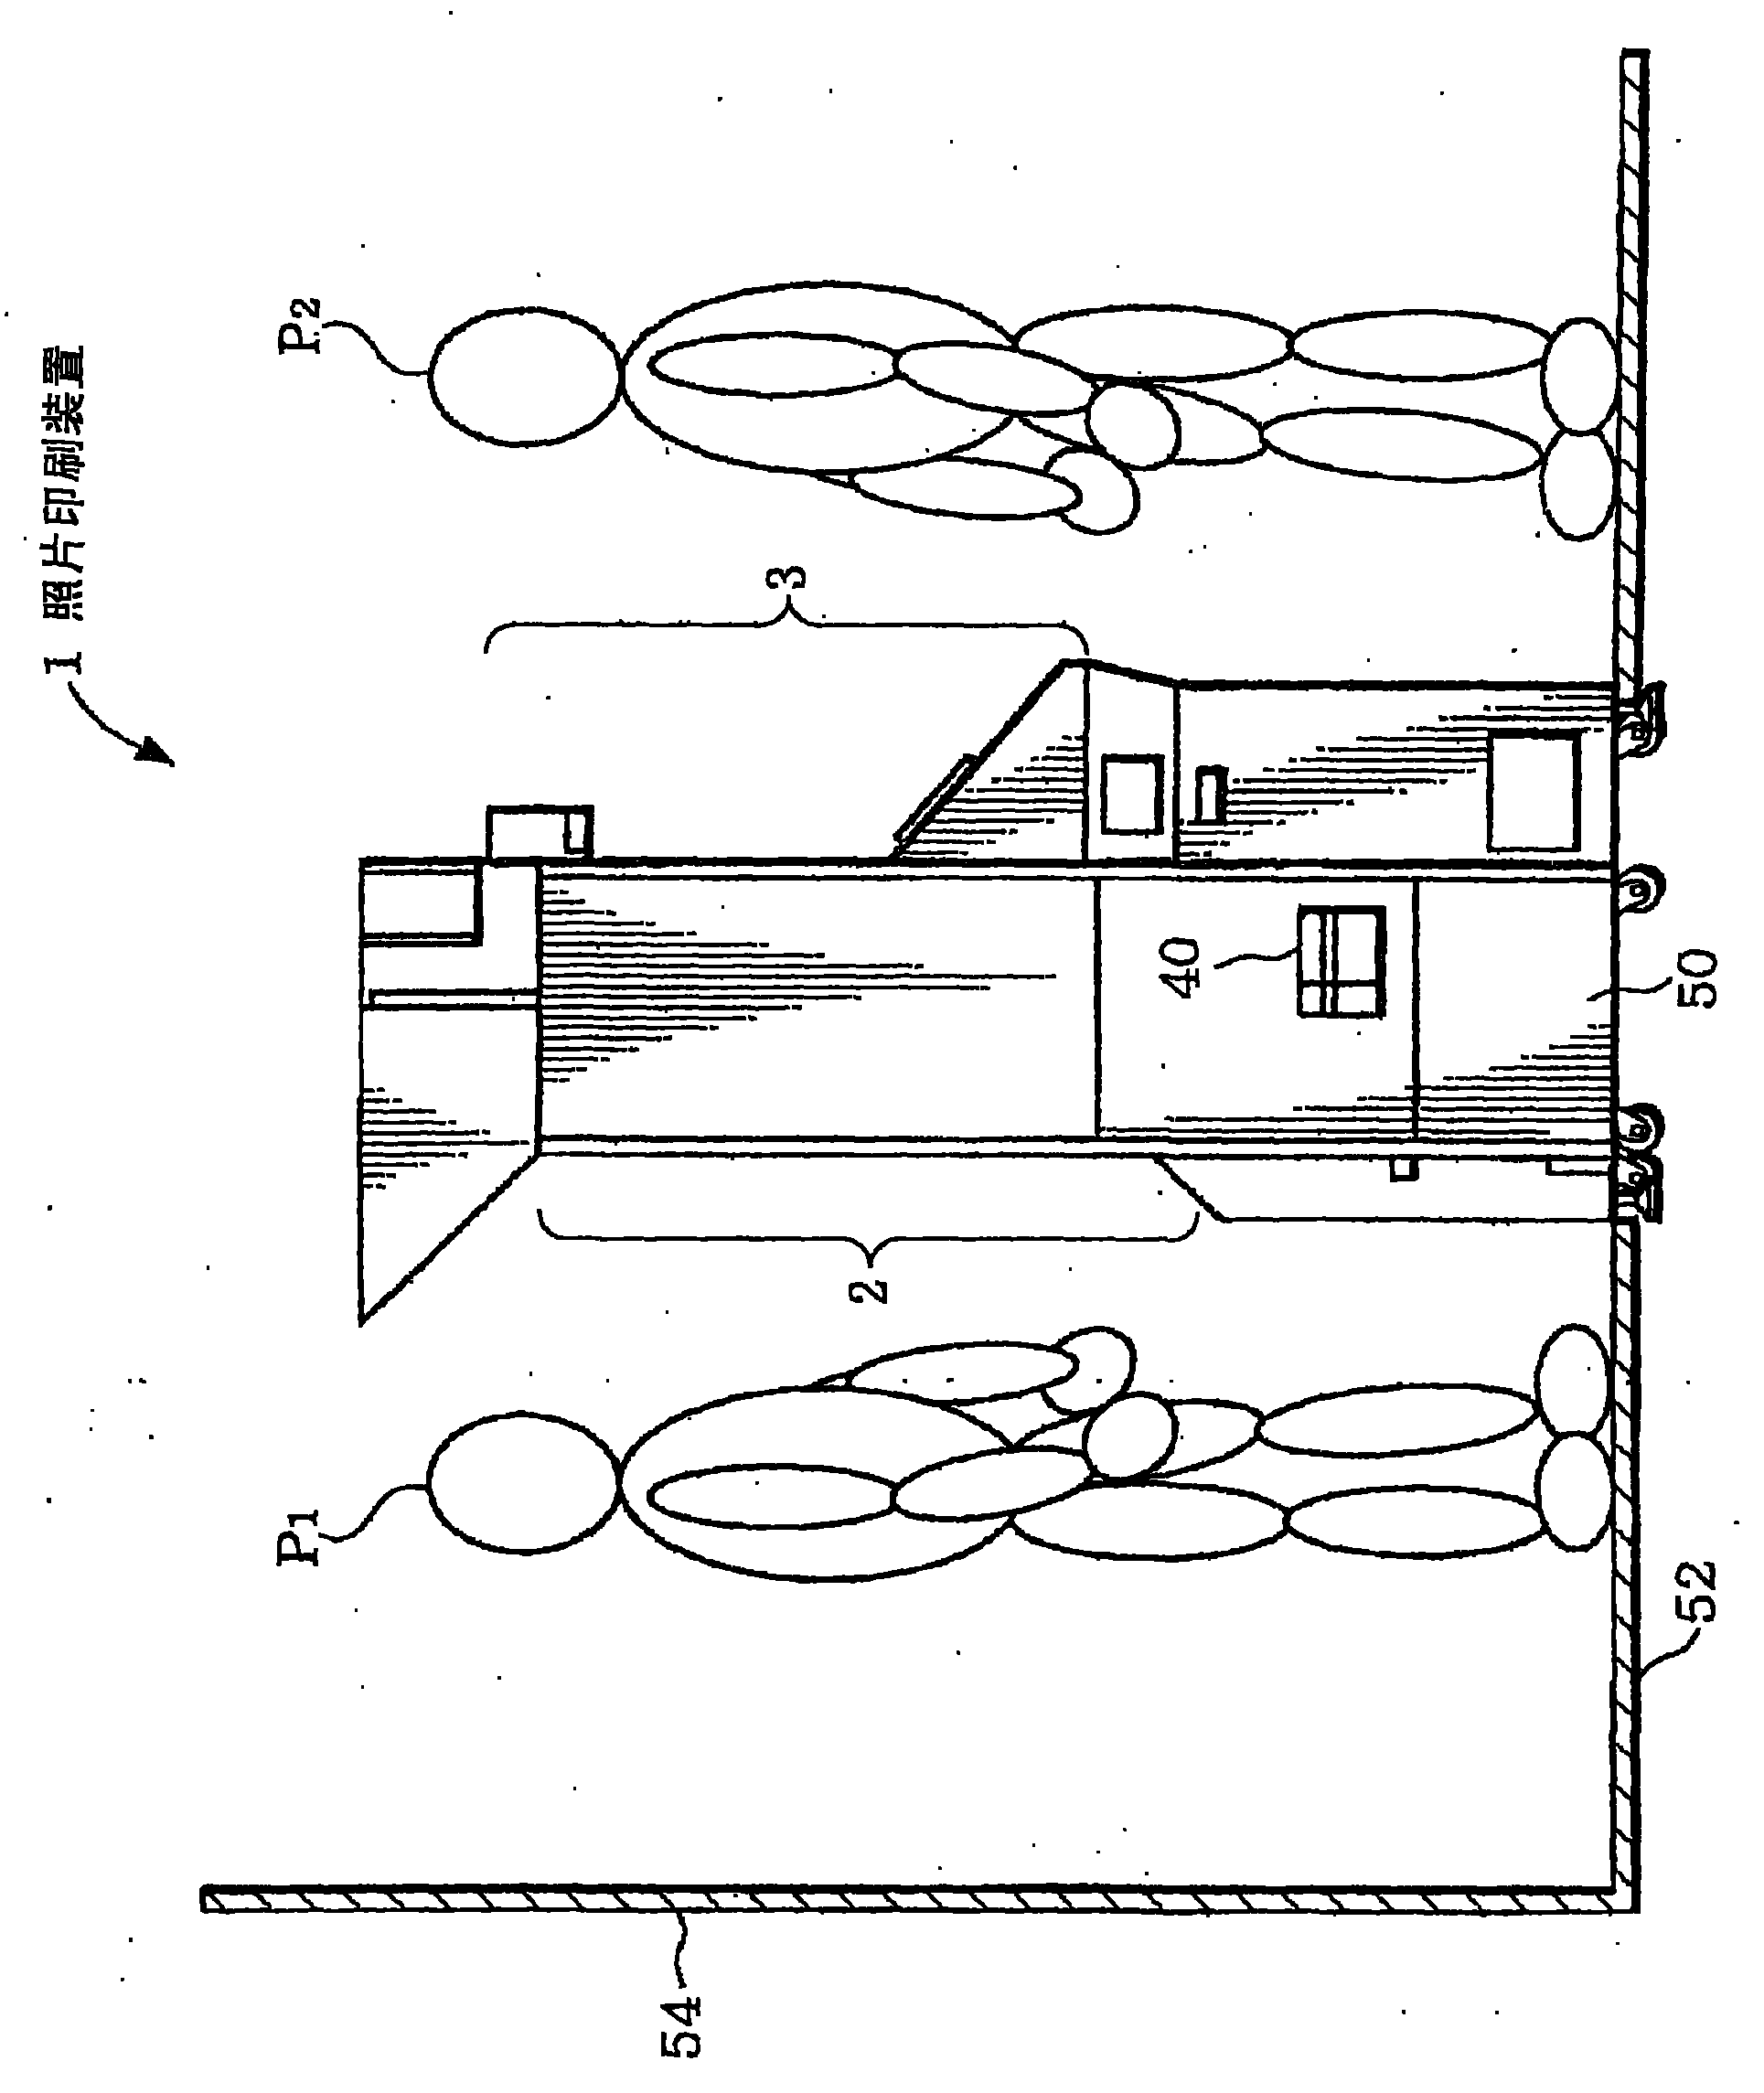 Photographic printing device and photographic printing method